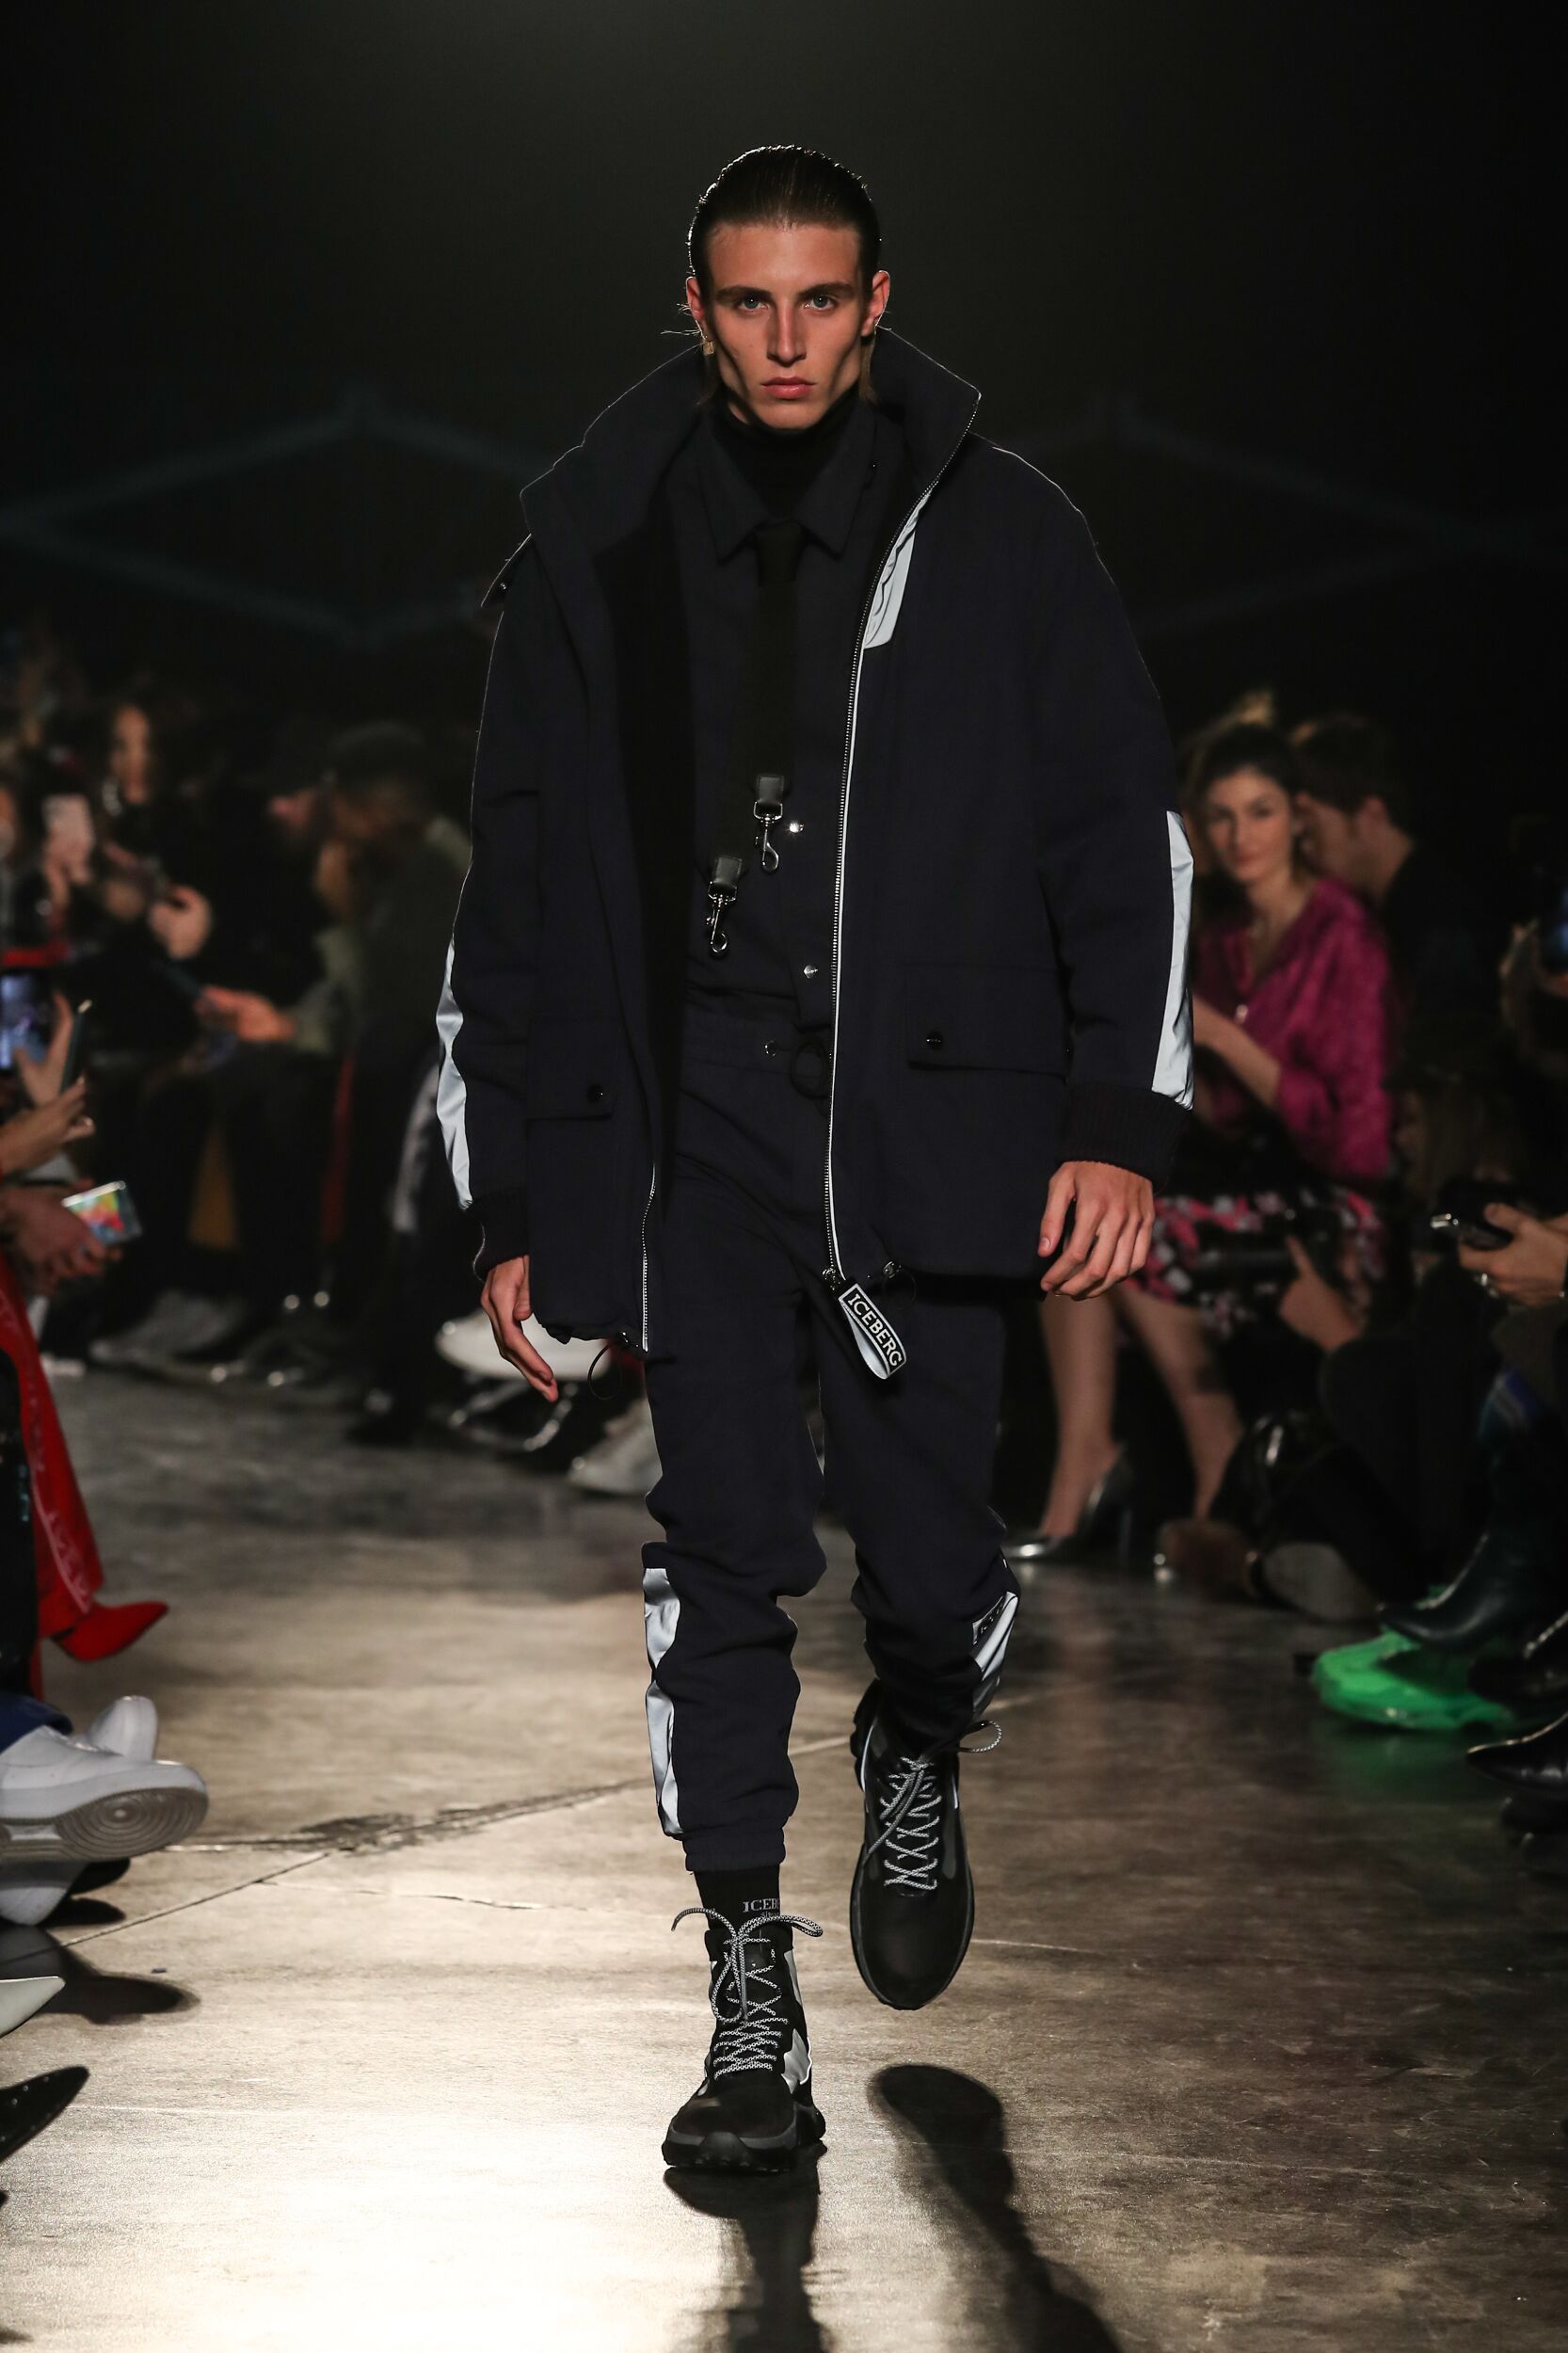 ICEBERG FALL WINTER 2020 MEN’S COLLECTION | The Skinny Beep